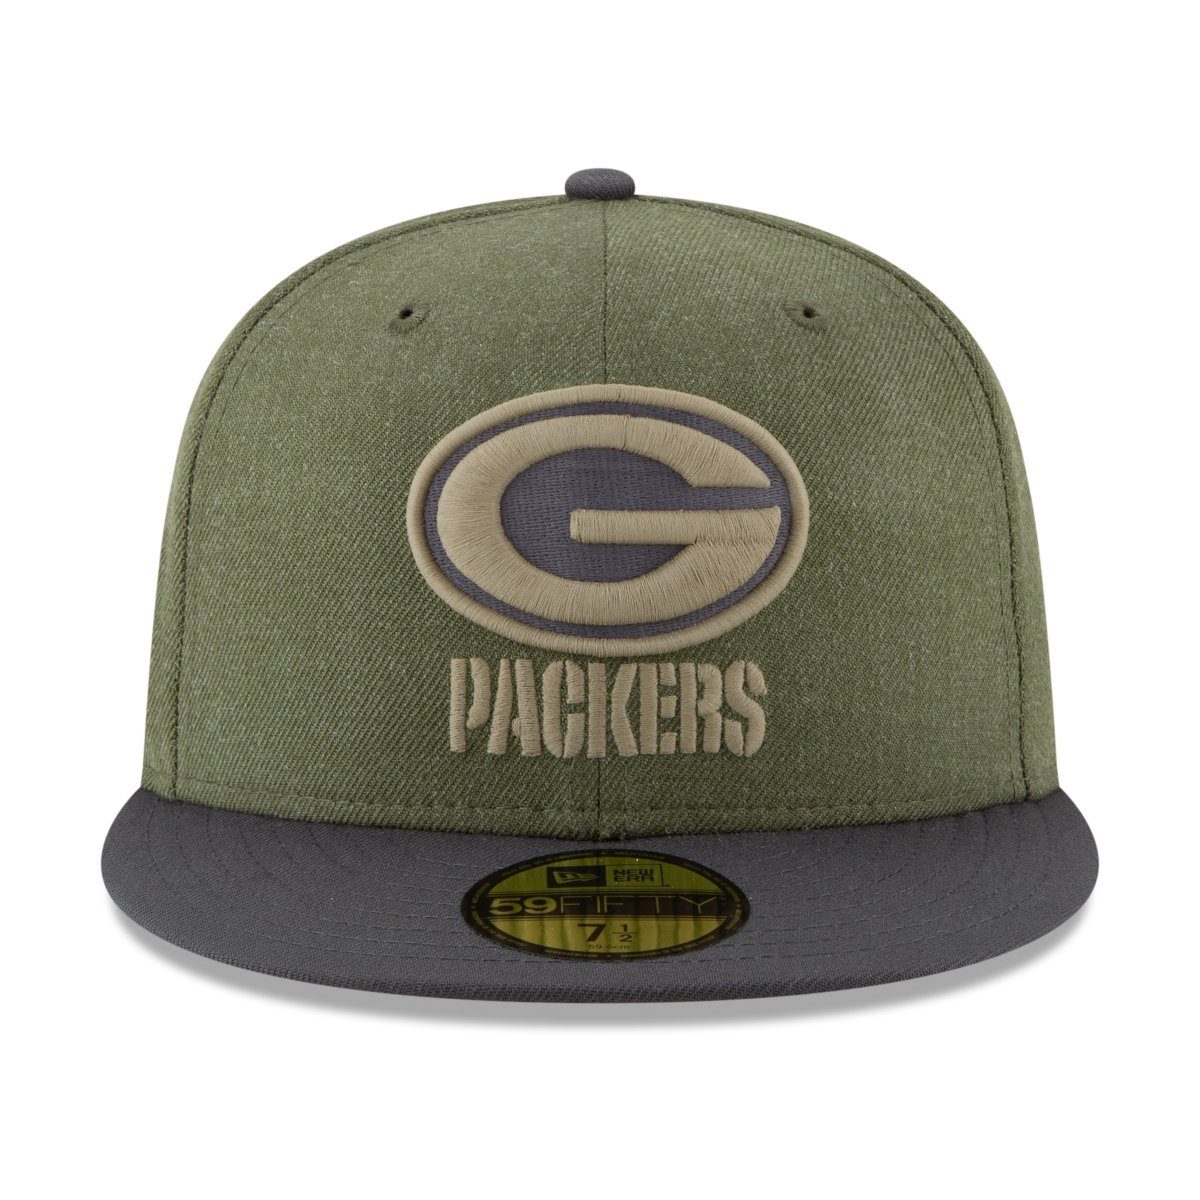 New Era Salute Cap to Packers Fitted Service 59Fifty Green Bay NFL